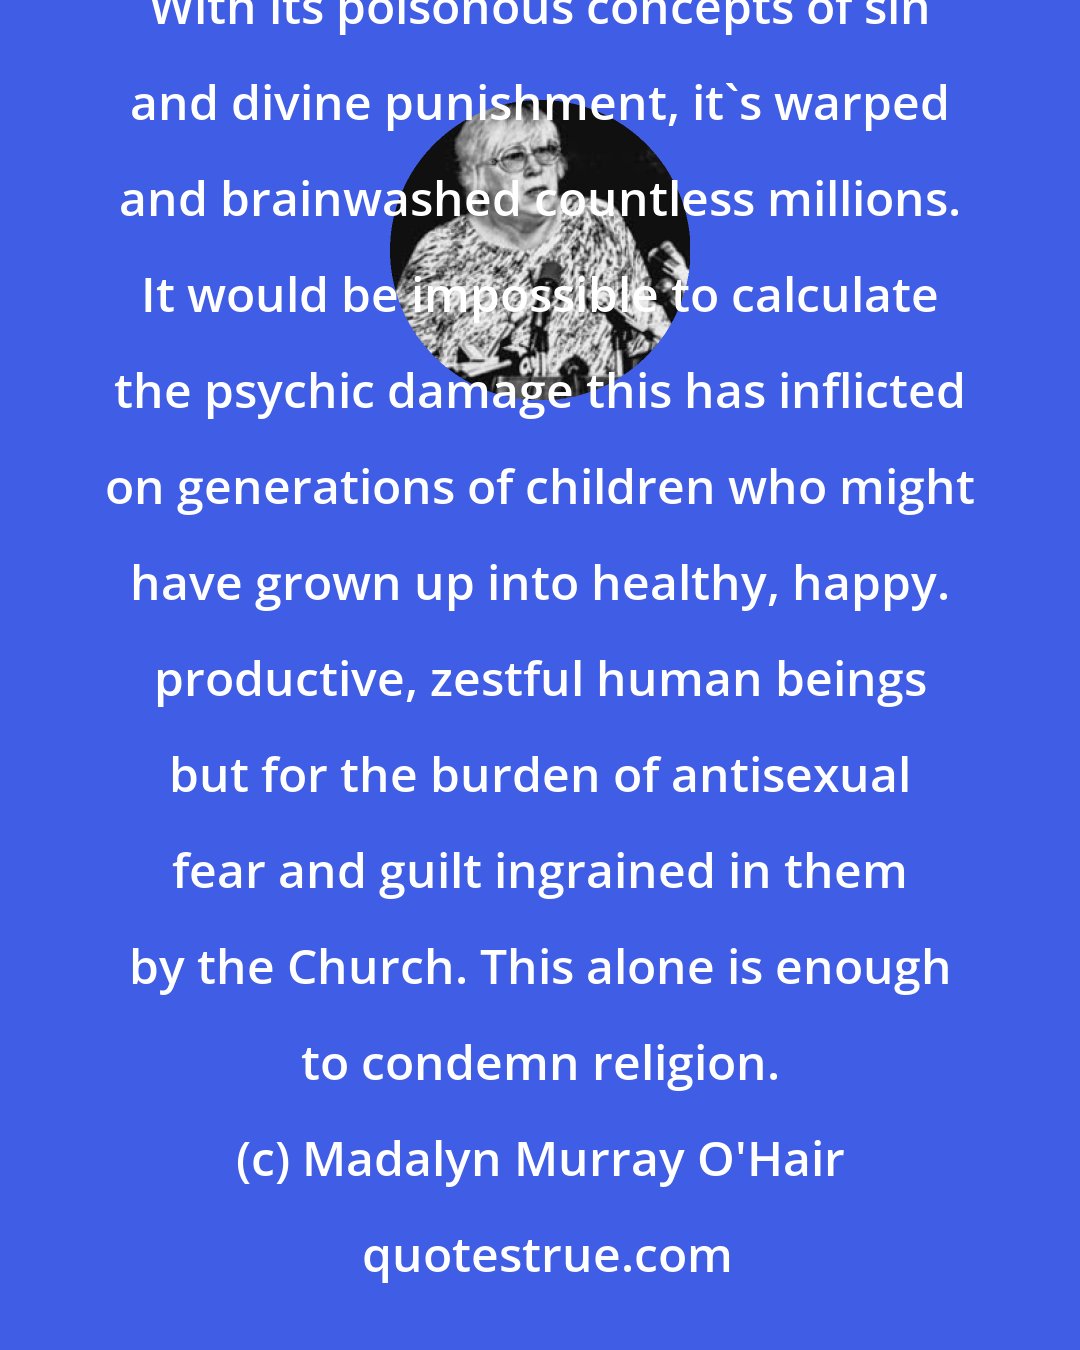 Madalyn Murray O'Hair: But the most heinous crime of the Church has been perpetrated not against churchmen but against churchgoers. With its poisonous concepts of sin and divine punishment, it's warped and brainwashed countless millions. It would be impossible to calculate the psychic damage this has inflicted on generations of children who might have grown up into healthy, happy. productive, zestful human beings but for the burden of antisexual fear and guilt ingrained in them by the Church. This alone is enough to condemn religion.